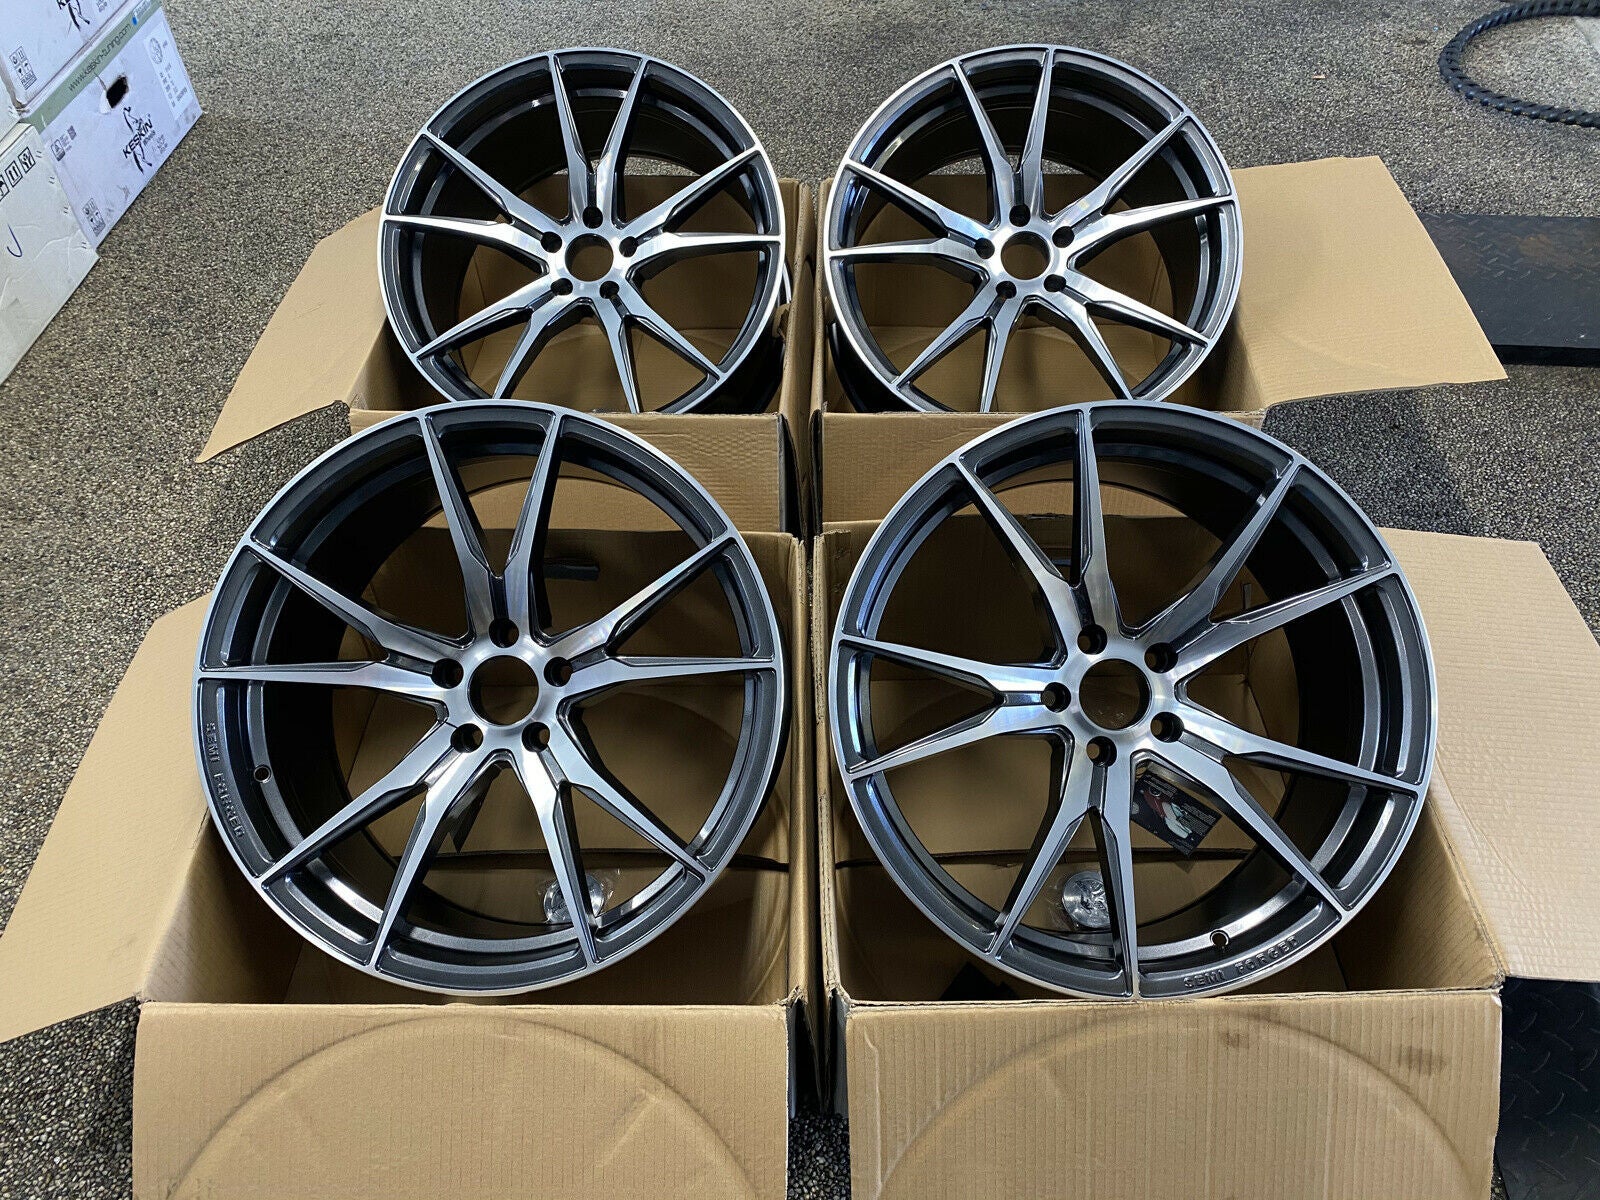 Ny 20” Concave Alufælge